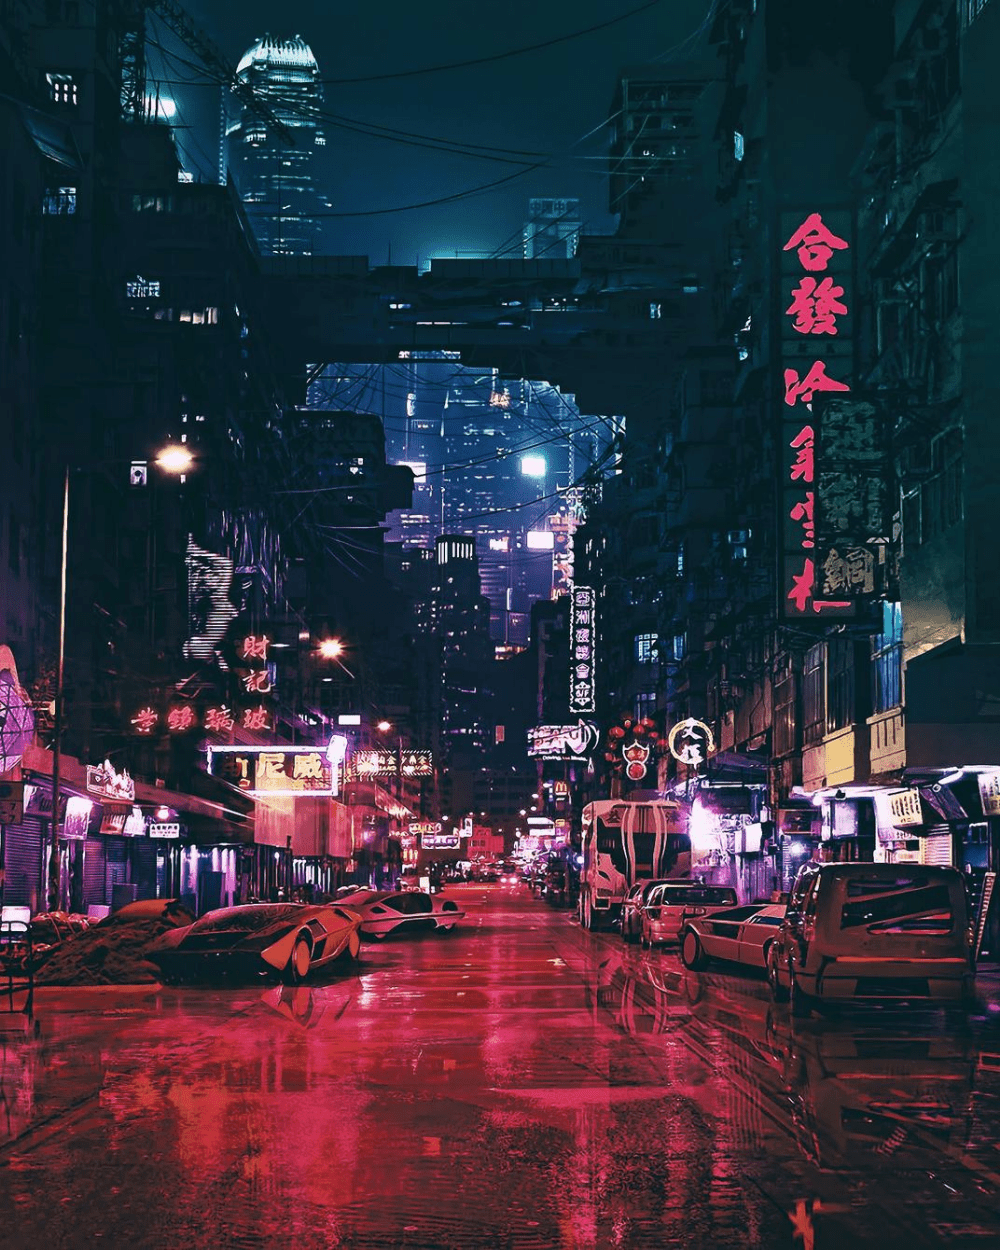 Free download Cyberpunk Futuristic City Science Fiction Concept Art 4k in 2020 [1000x1250] for your Desktop, Mobile & Tablet. Explore Night Aesthetic 4k WallpaperK Night Sky Wallpaper, Aesthetic